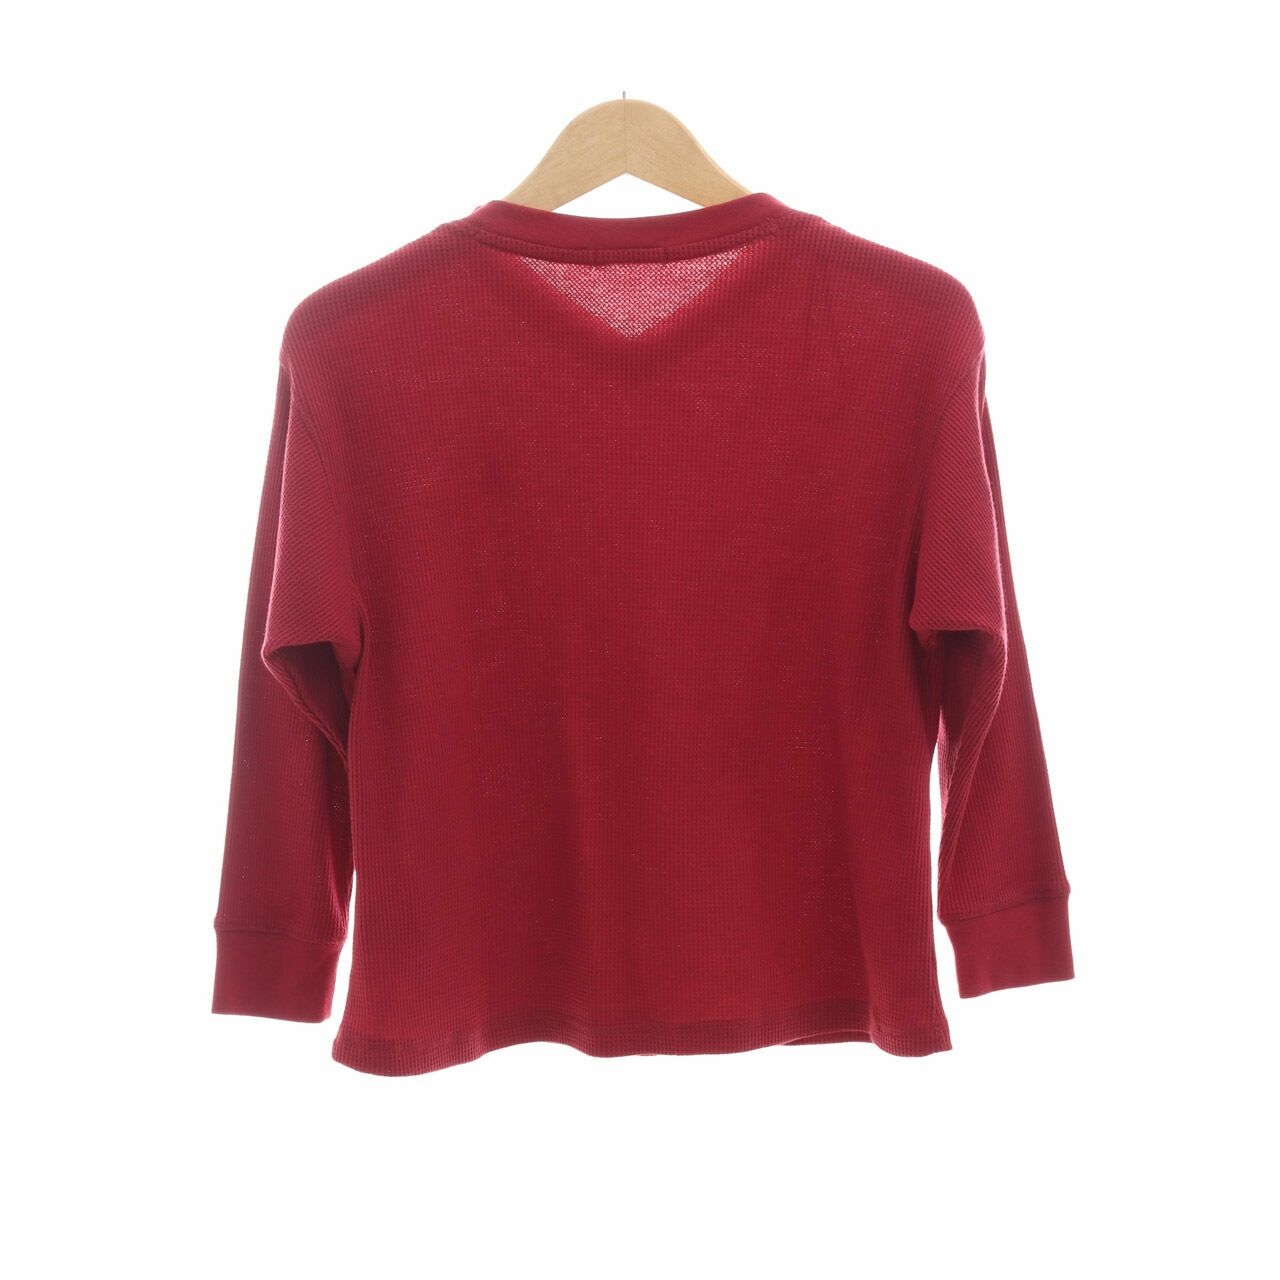 Hush Puppies Red Blouse